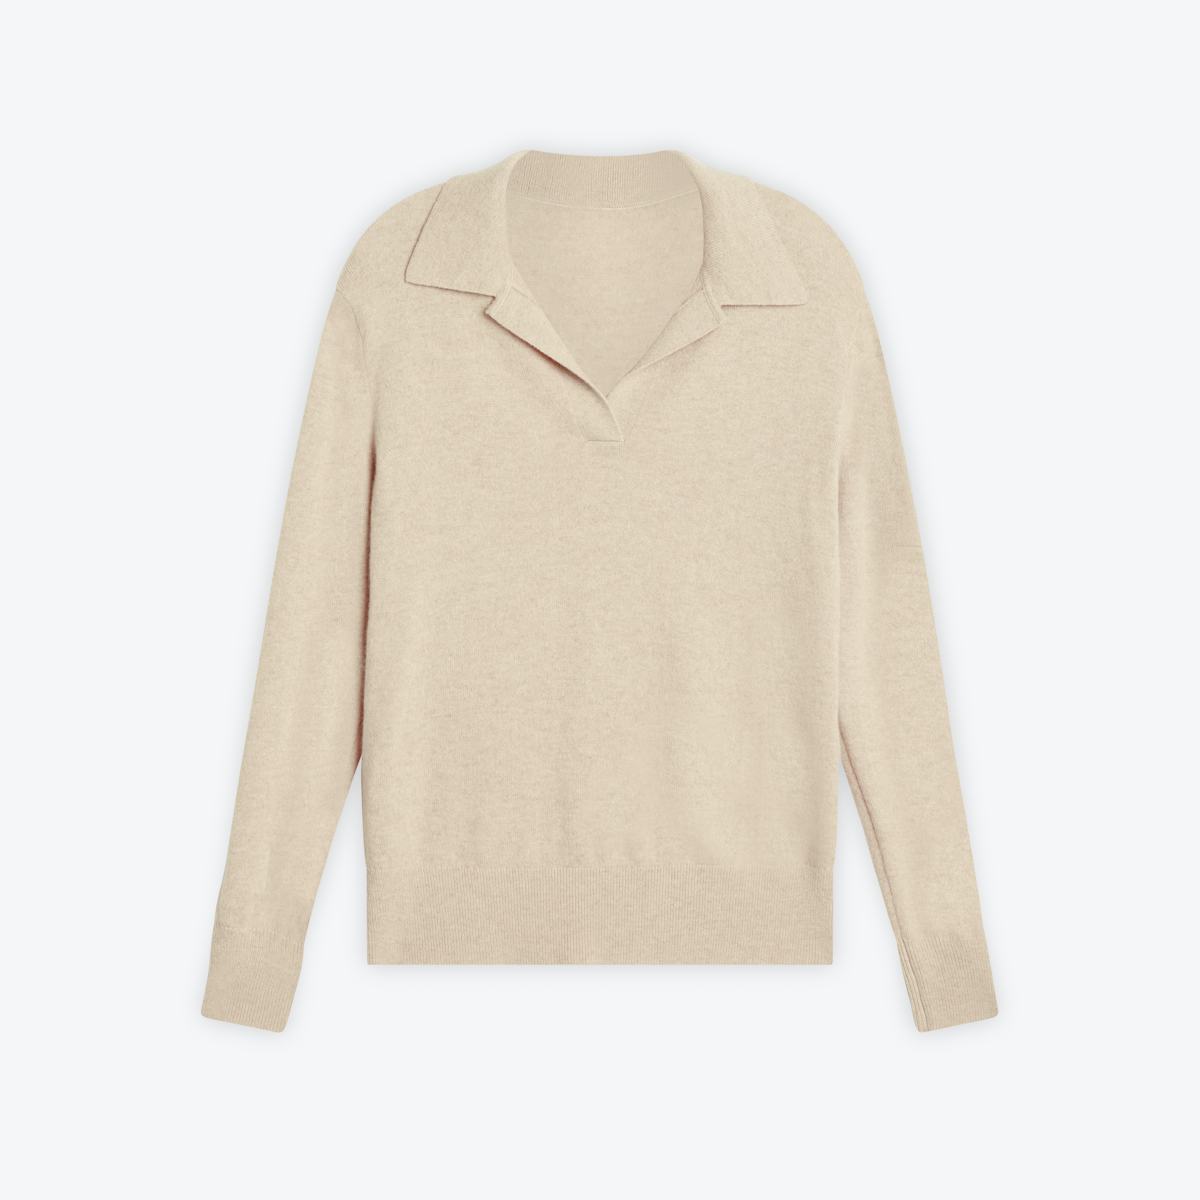 Airy Cashmere Collared Sweater